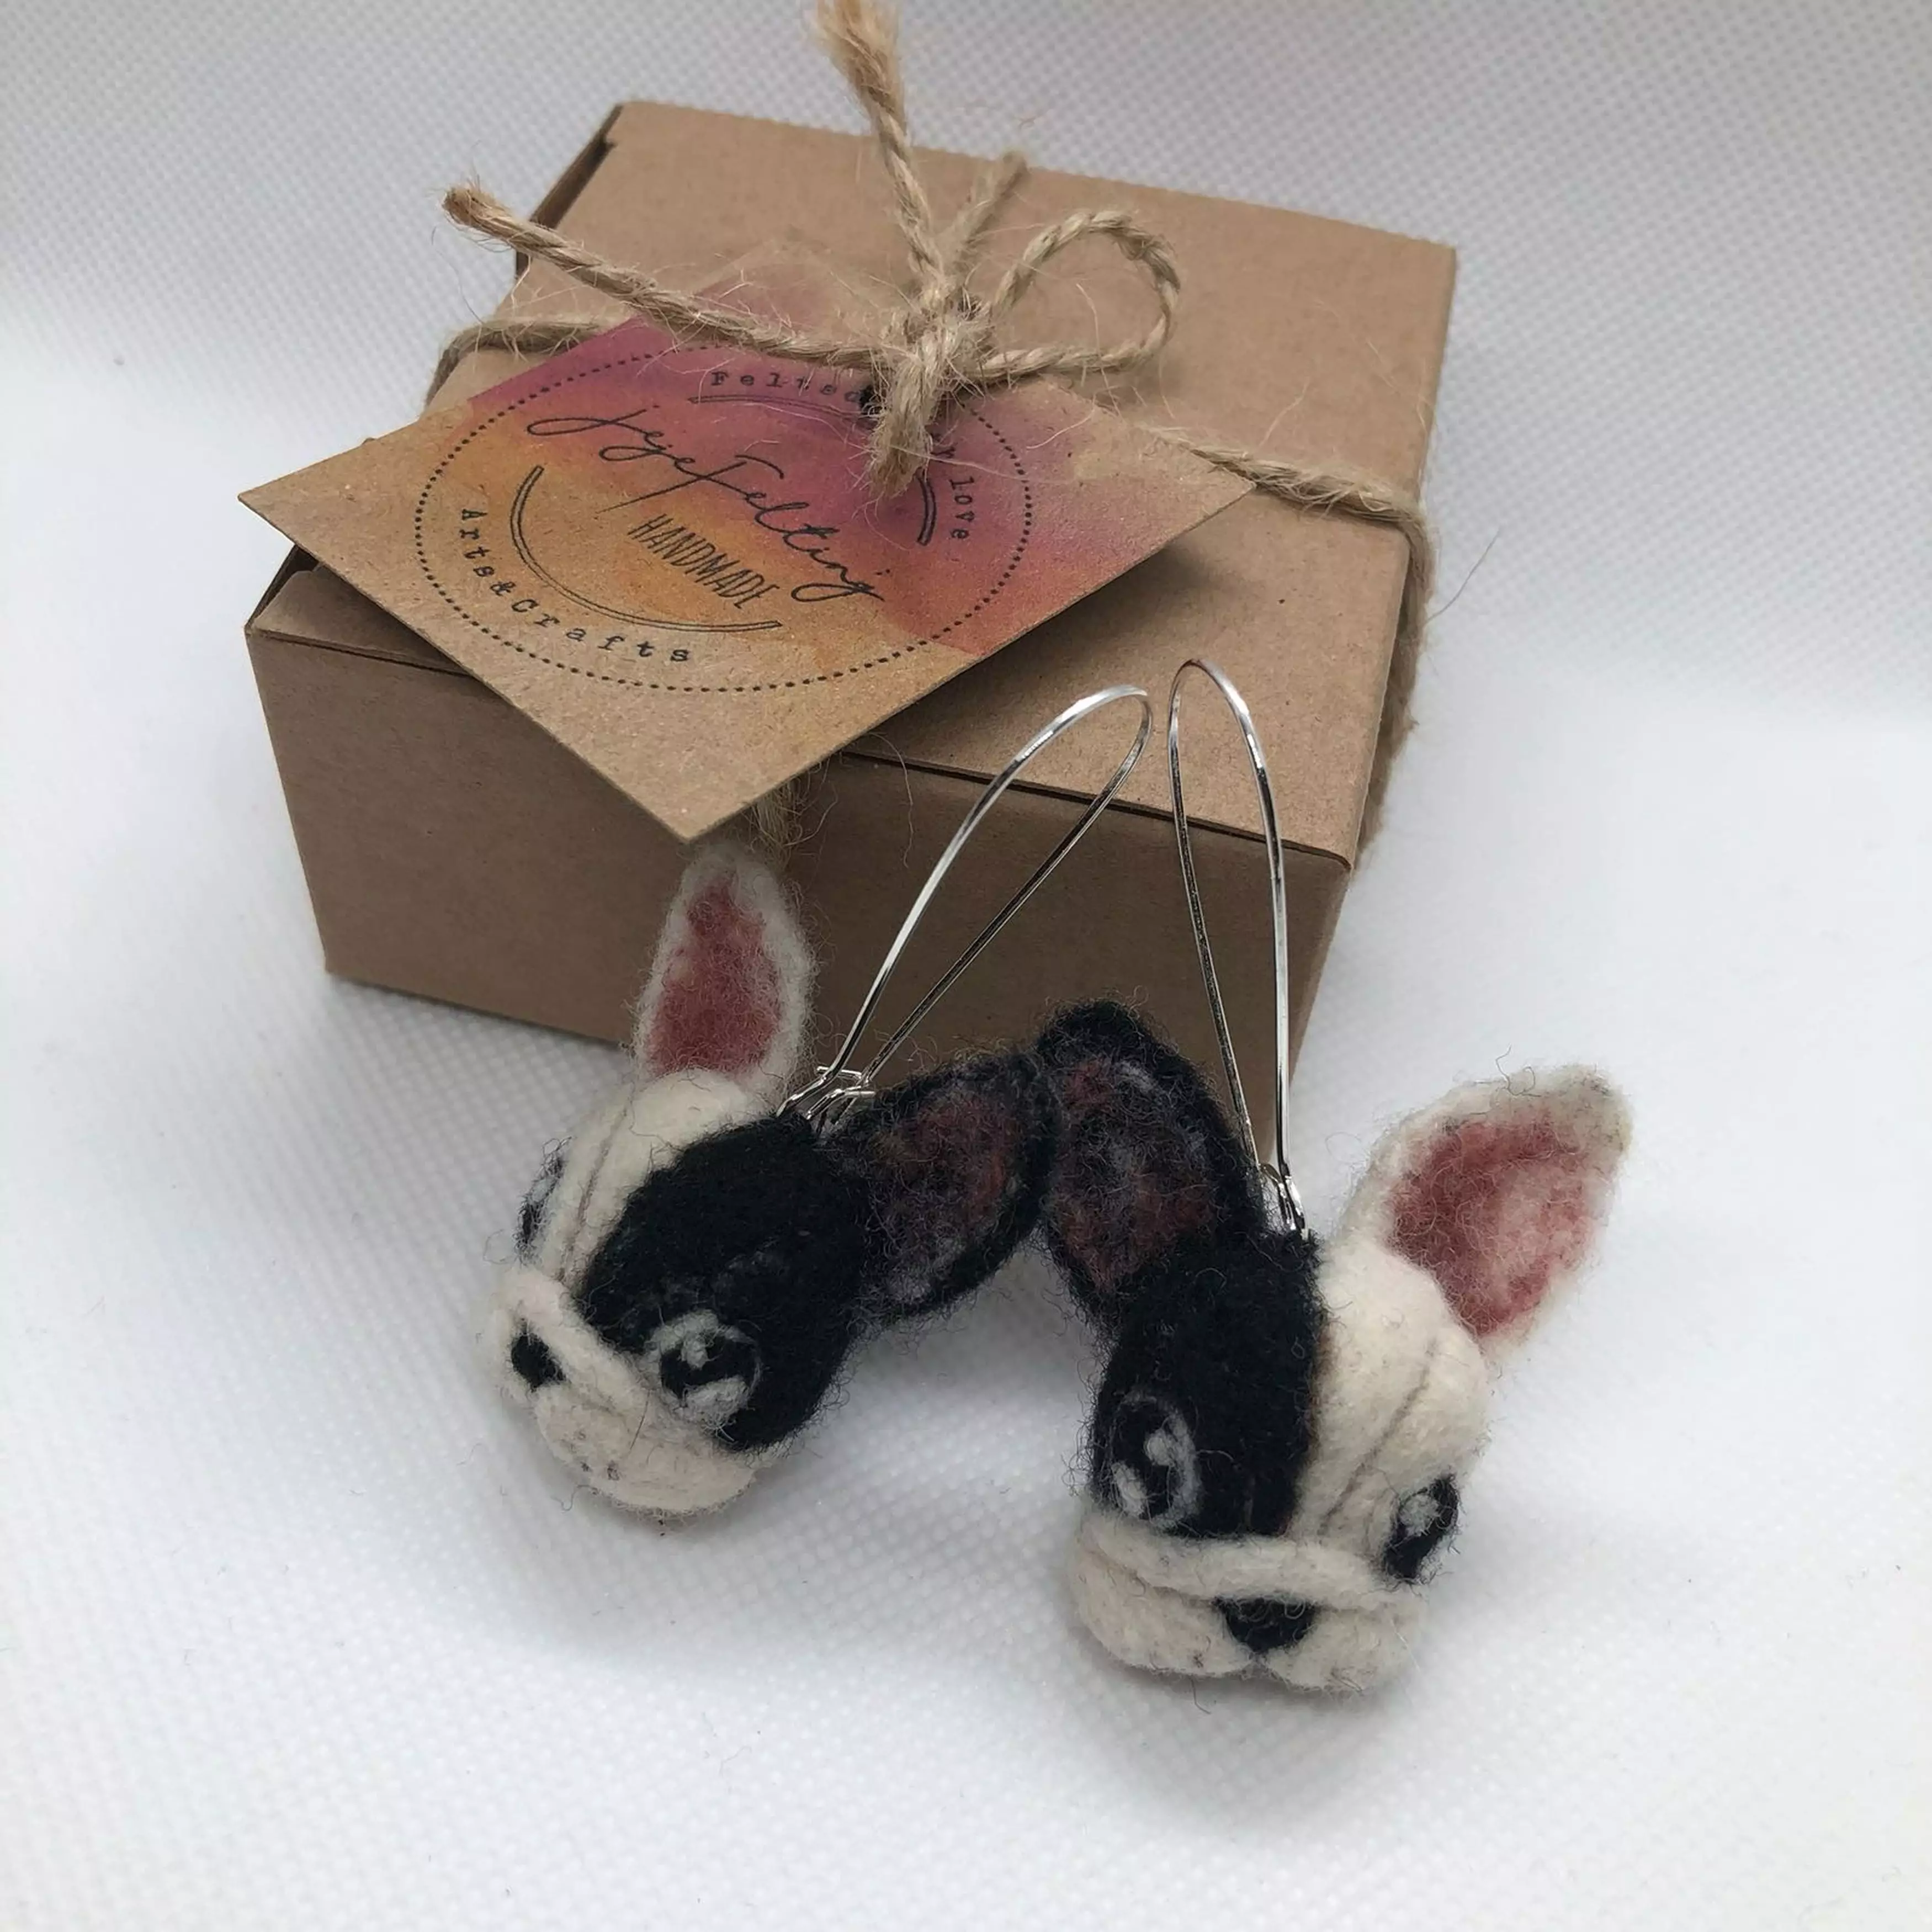 Pelin also makes jewellery like these French Bulldog earrings.